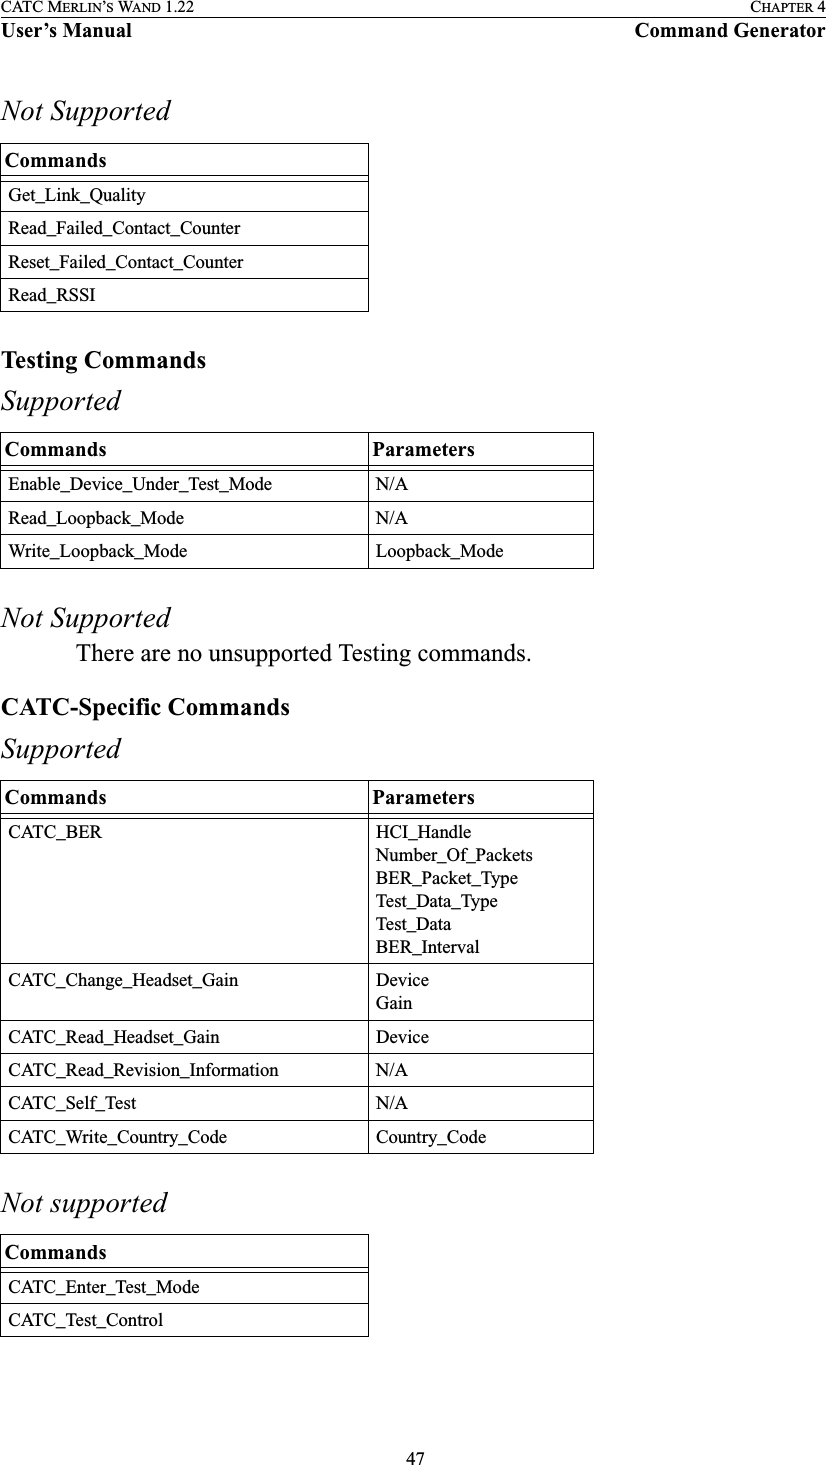  47CATC MERLIN’S WAND 1.22 CHAPTER 4User’s Manual Command GeneratorNot SupportedTesting CommandsSupportedNot SupportedThere are no unsupported Testing commands.CATC-Specific CommandsSupportedNot supportedCommandsGet_Link_QualityRead_Failed_Contact_CounterReset_Failed_Contact_CounterRead_RSSICommands ParametersEnable_Device_Under_Test_Mode N/ARead_Loopback_Mode N/AWrite_Loopback_Mode Loopback_ModeCommands ParametersCATC_BER HCI_HandleNumber_Of_PacketsBER_Packet_TypeTest_Data_TypeTest_DataBER_IntervalCATC_Change_Headset_Gain DeviceGainCATC_Read_Headset_Gain DeviceCATC_Read_Revision_Information N/ACATC_Self_Test N/ACATC_Write_Country_Code Country_CodeCommandsCATC_Enter_Test_ModeCATC_Test_Control